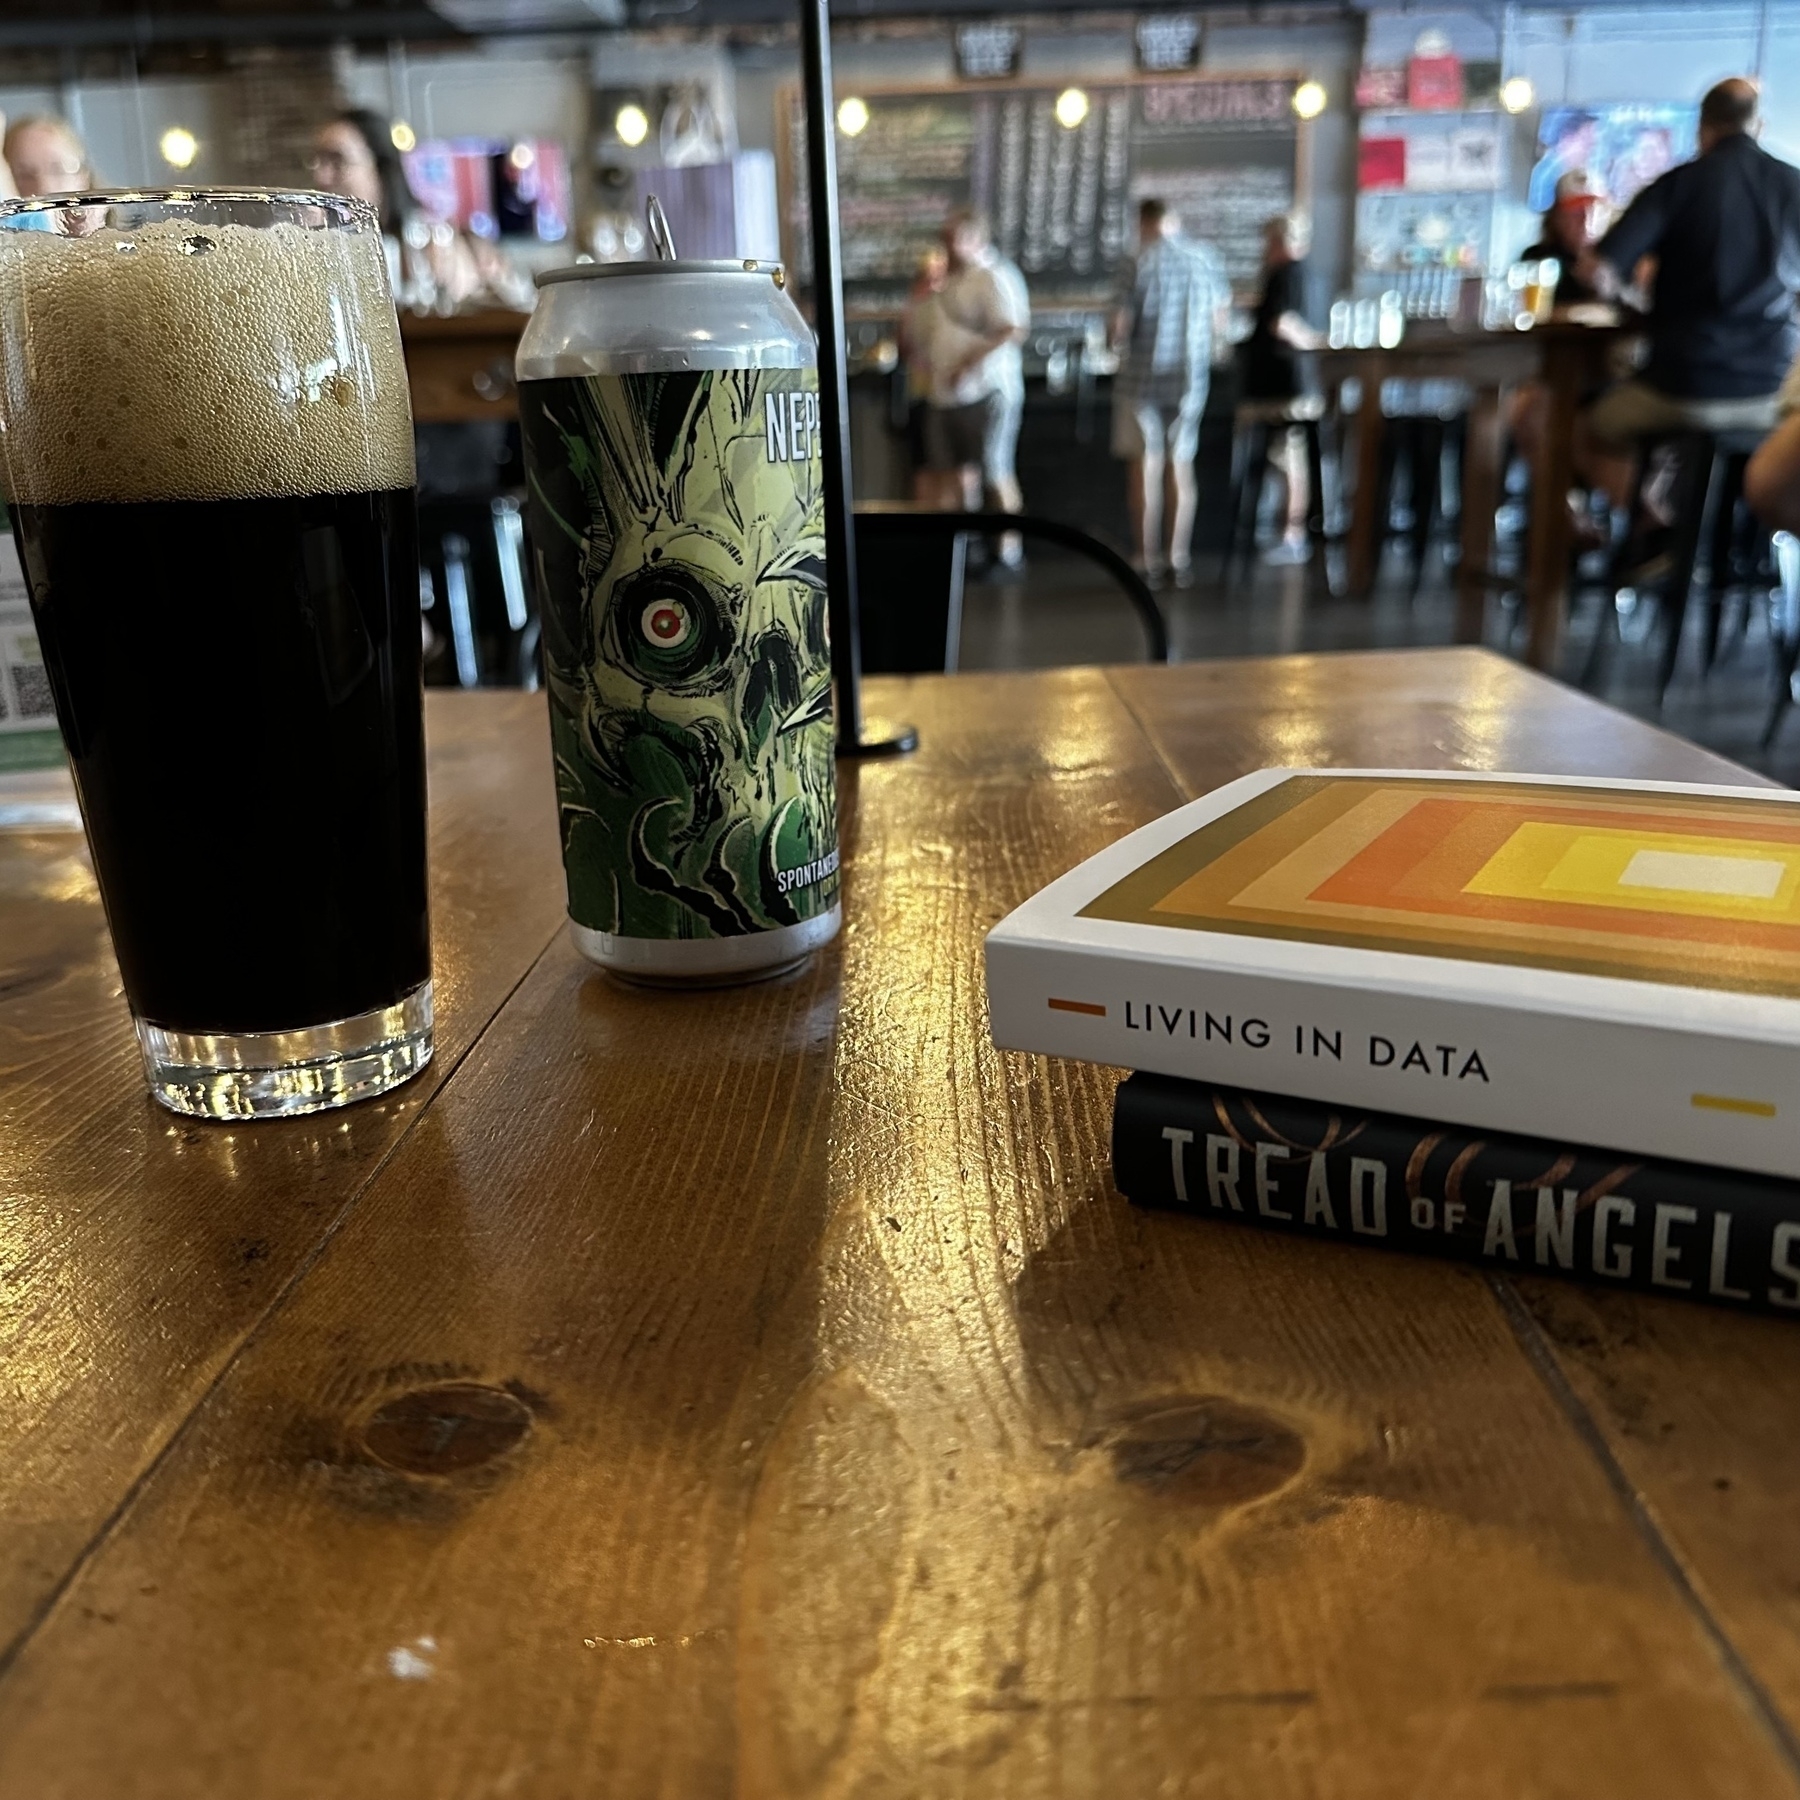 A dark beer in a pint glass with 2 inches of foam on top. Next to it, a tall can with a green stylized skull. Stacked next to the beer are two books, a dark cover below and a white cover above. 